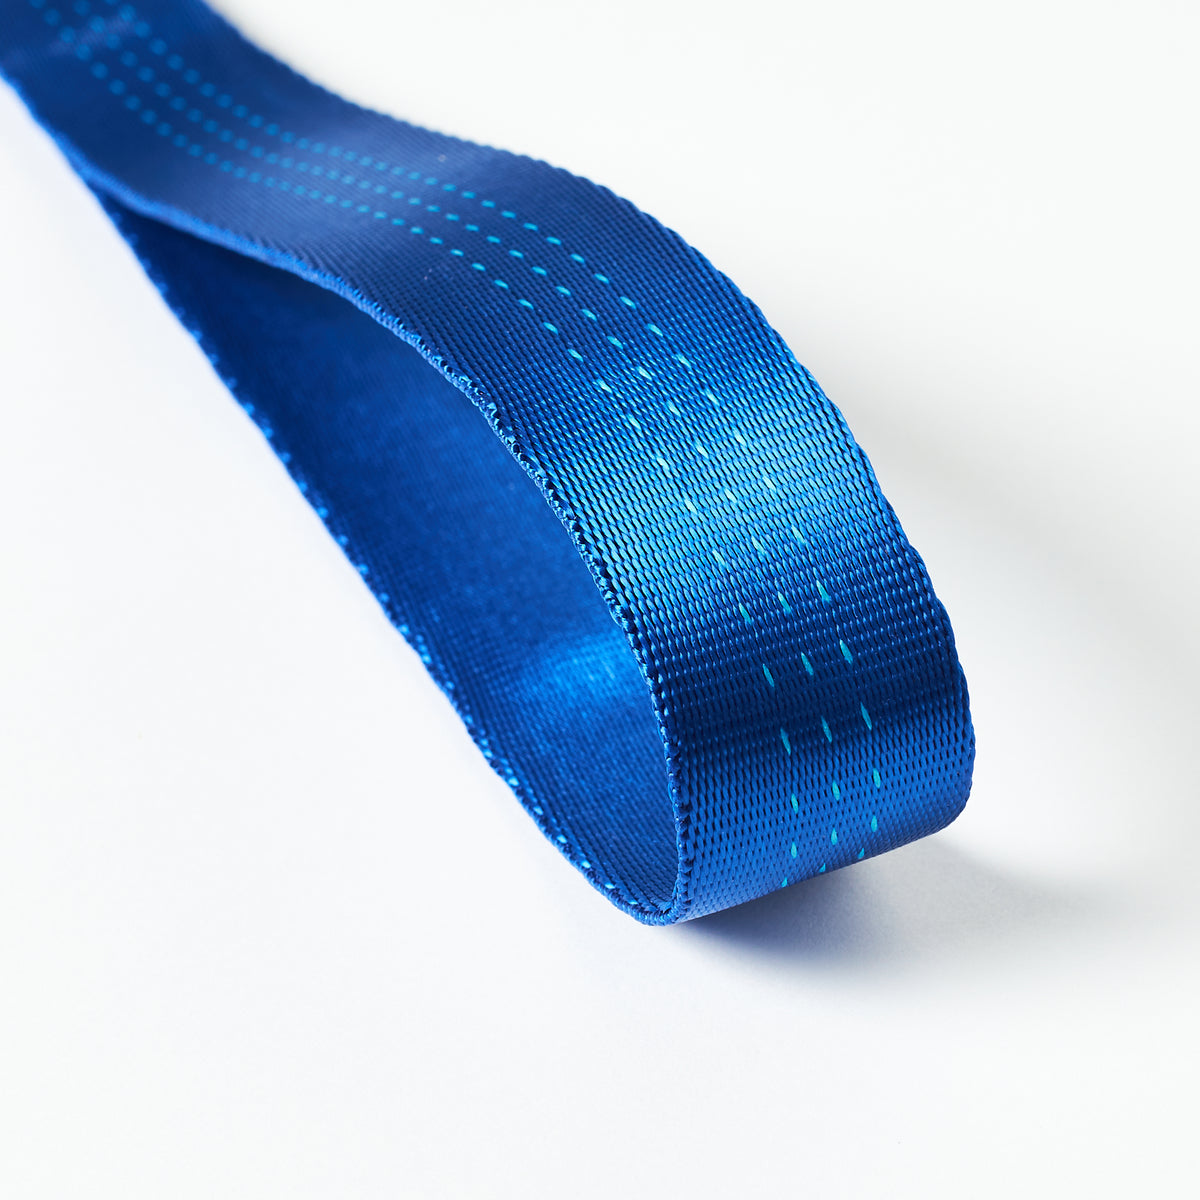 Custom 1inch nylon tubular webbing Manufacturers and Suppliers - Free  Sample in Stock - Dyneema